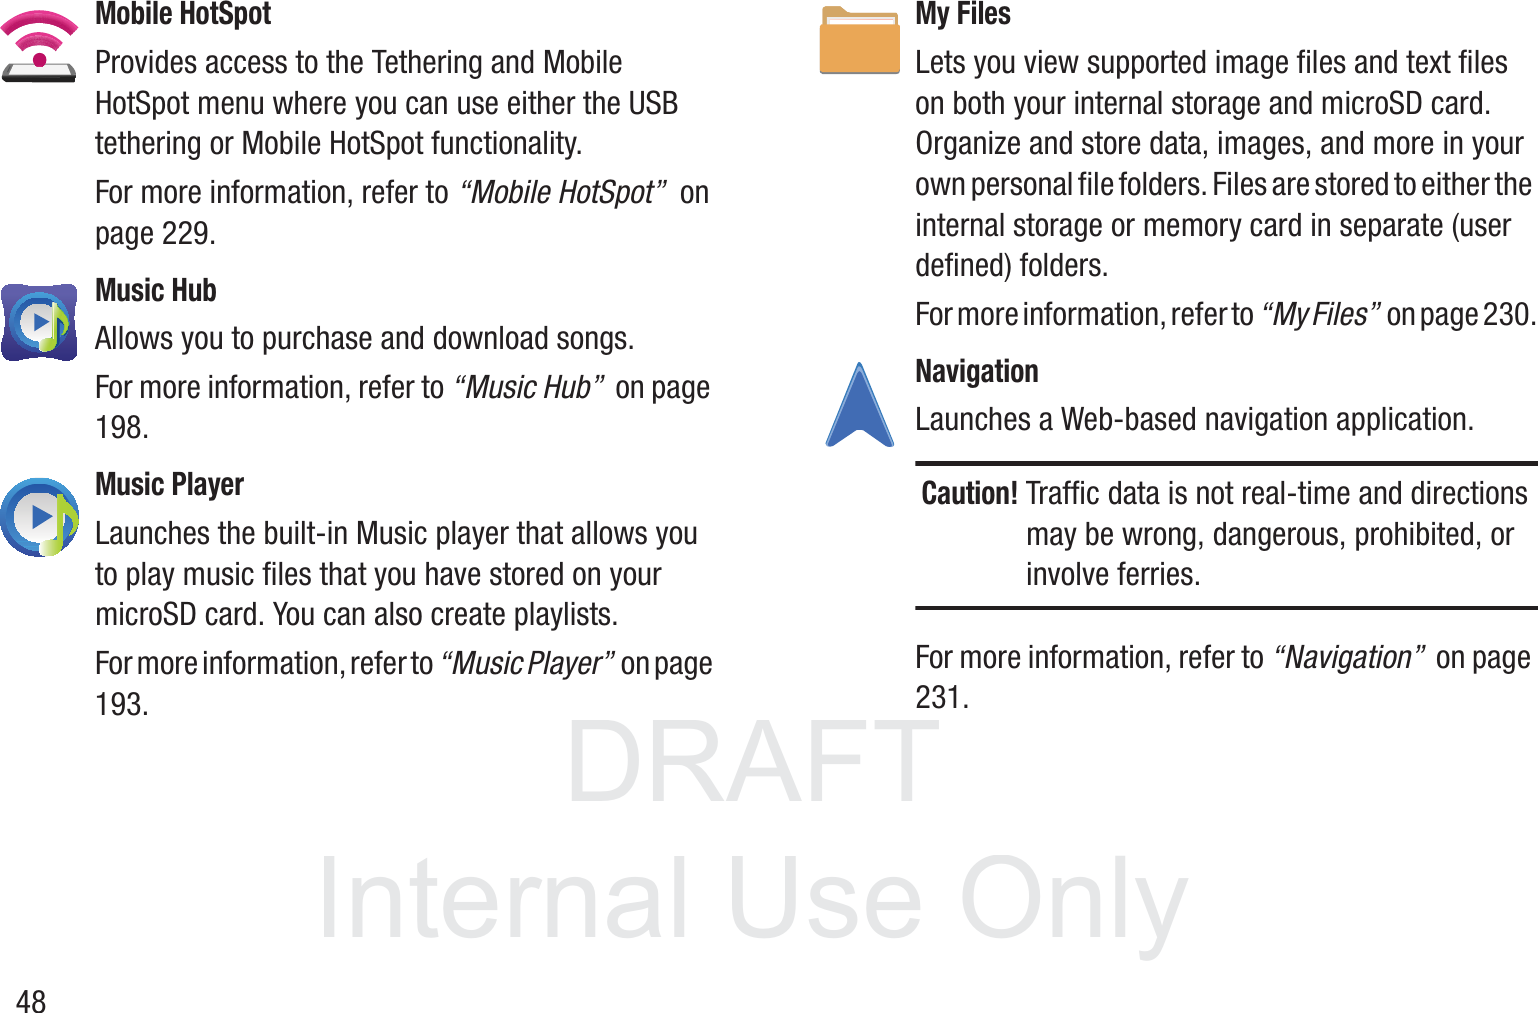 DRAFT InternalUse Only48Mobile HotSpotProvides access to the Tethering and Mobile HotSpot menu where you can use either the USB tethering or Mobile HotSpot functionality.For more information, refer to “Mobile HotSpot”  on page 229.Music HubAllows you to purchase and download songs.For more information, refer to “Music Hub”  on page 198.Music PlayerLaunches the built-in Music player that allows you to play music files that you have stored on your microSD card. You can also create playlists. For more information, refer to “Music Player”  on page 193.My FilesLets you view supported image files and text files on both your internal storage and microSD card. Organize and store data, images, and more in your own personal file folders. Files are stored to either the internal storage or memory card in separate (user defined) folders.For more information, refer to “My Files”  on page 230.Navigation Launches a Web-based navigation application.Caution! Traffic data is not real-time and directions may be wrong, dangerous, prohibited, or involve ferries.For more information, refer to “Navigation”  on page 231.